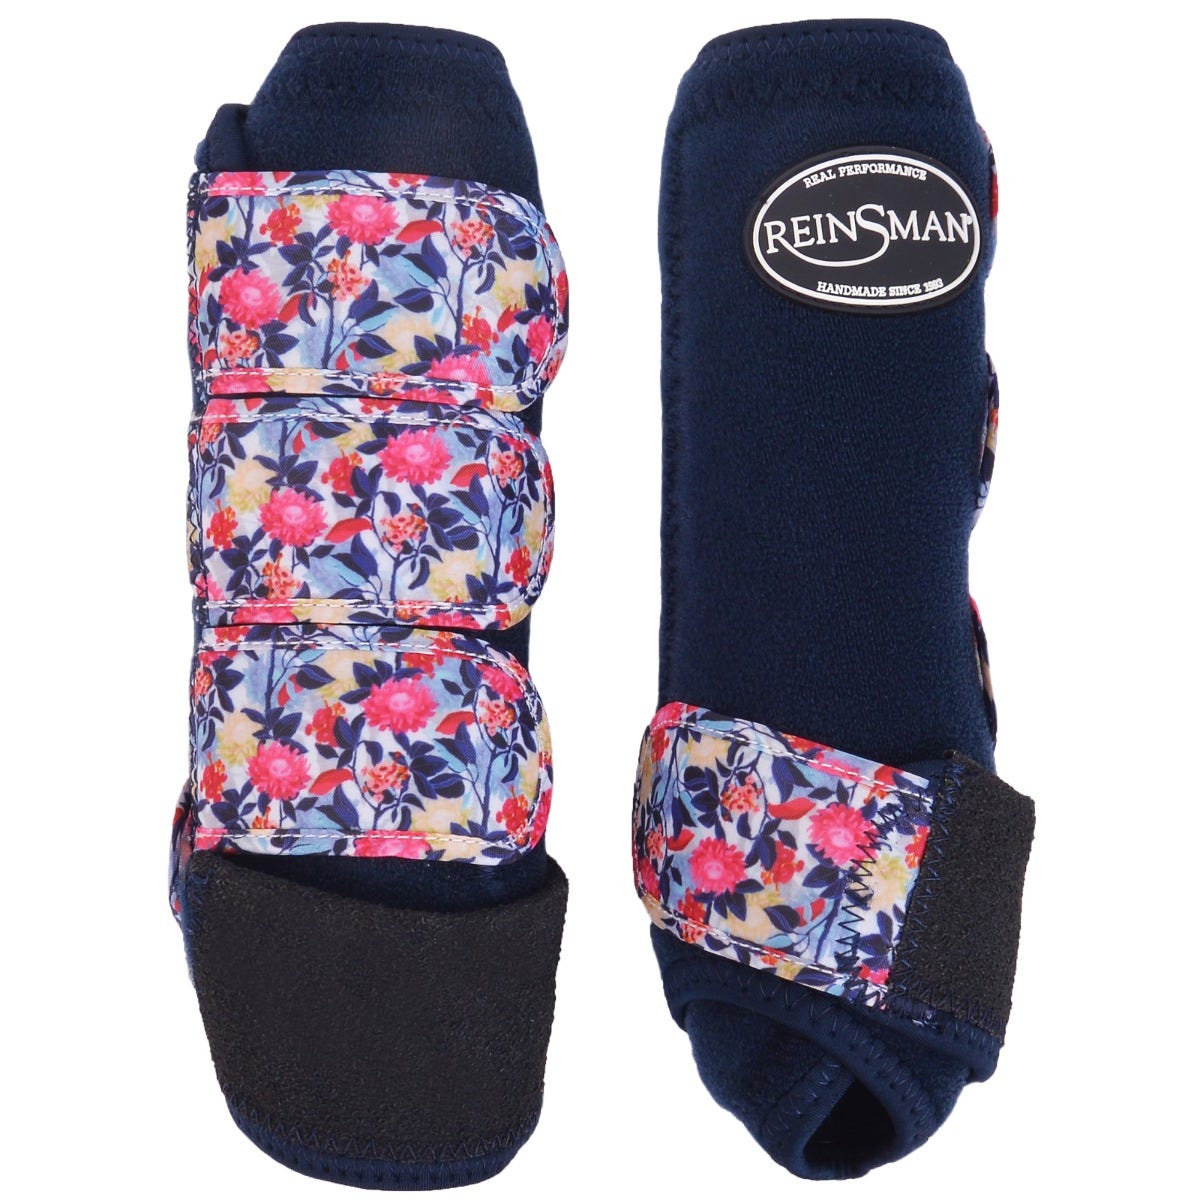 APEX Sport Boots - Navy Floral 0